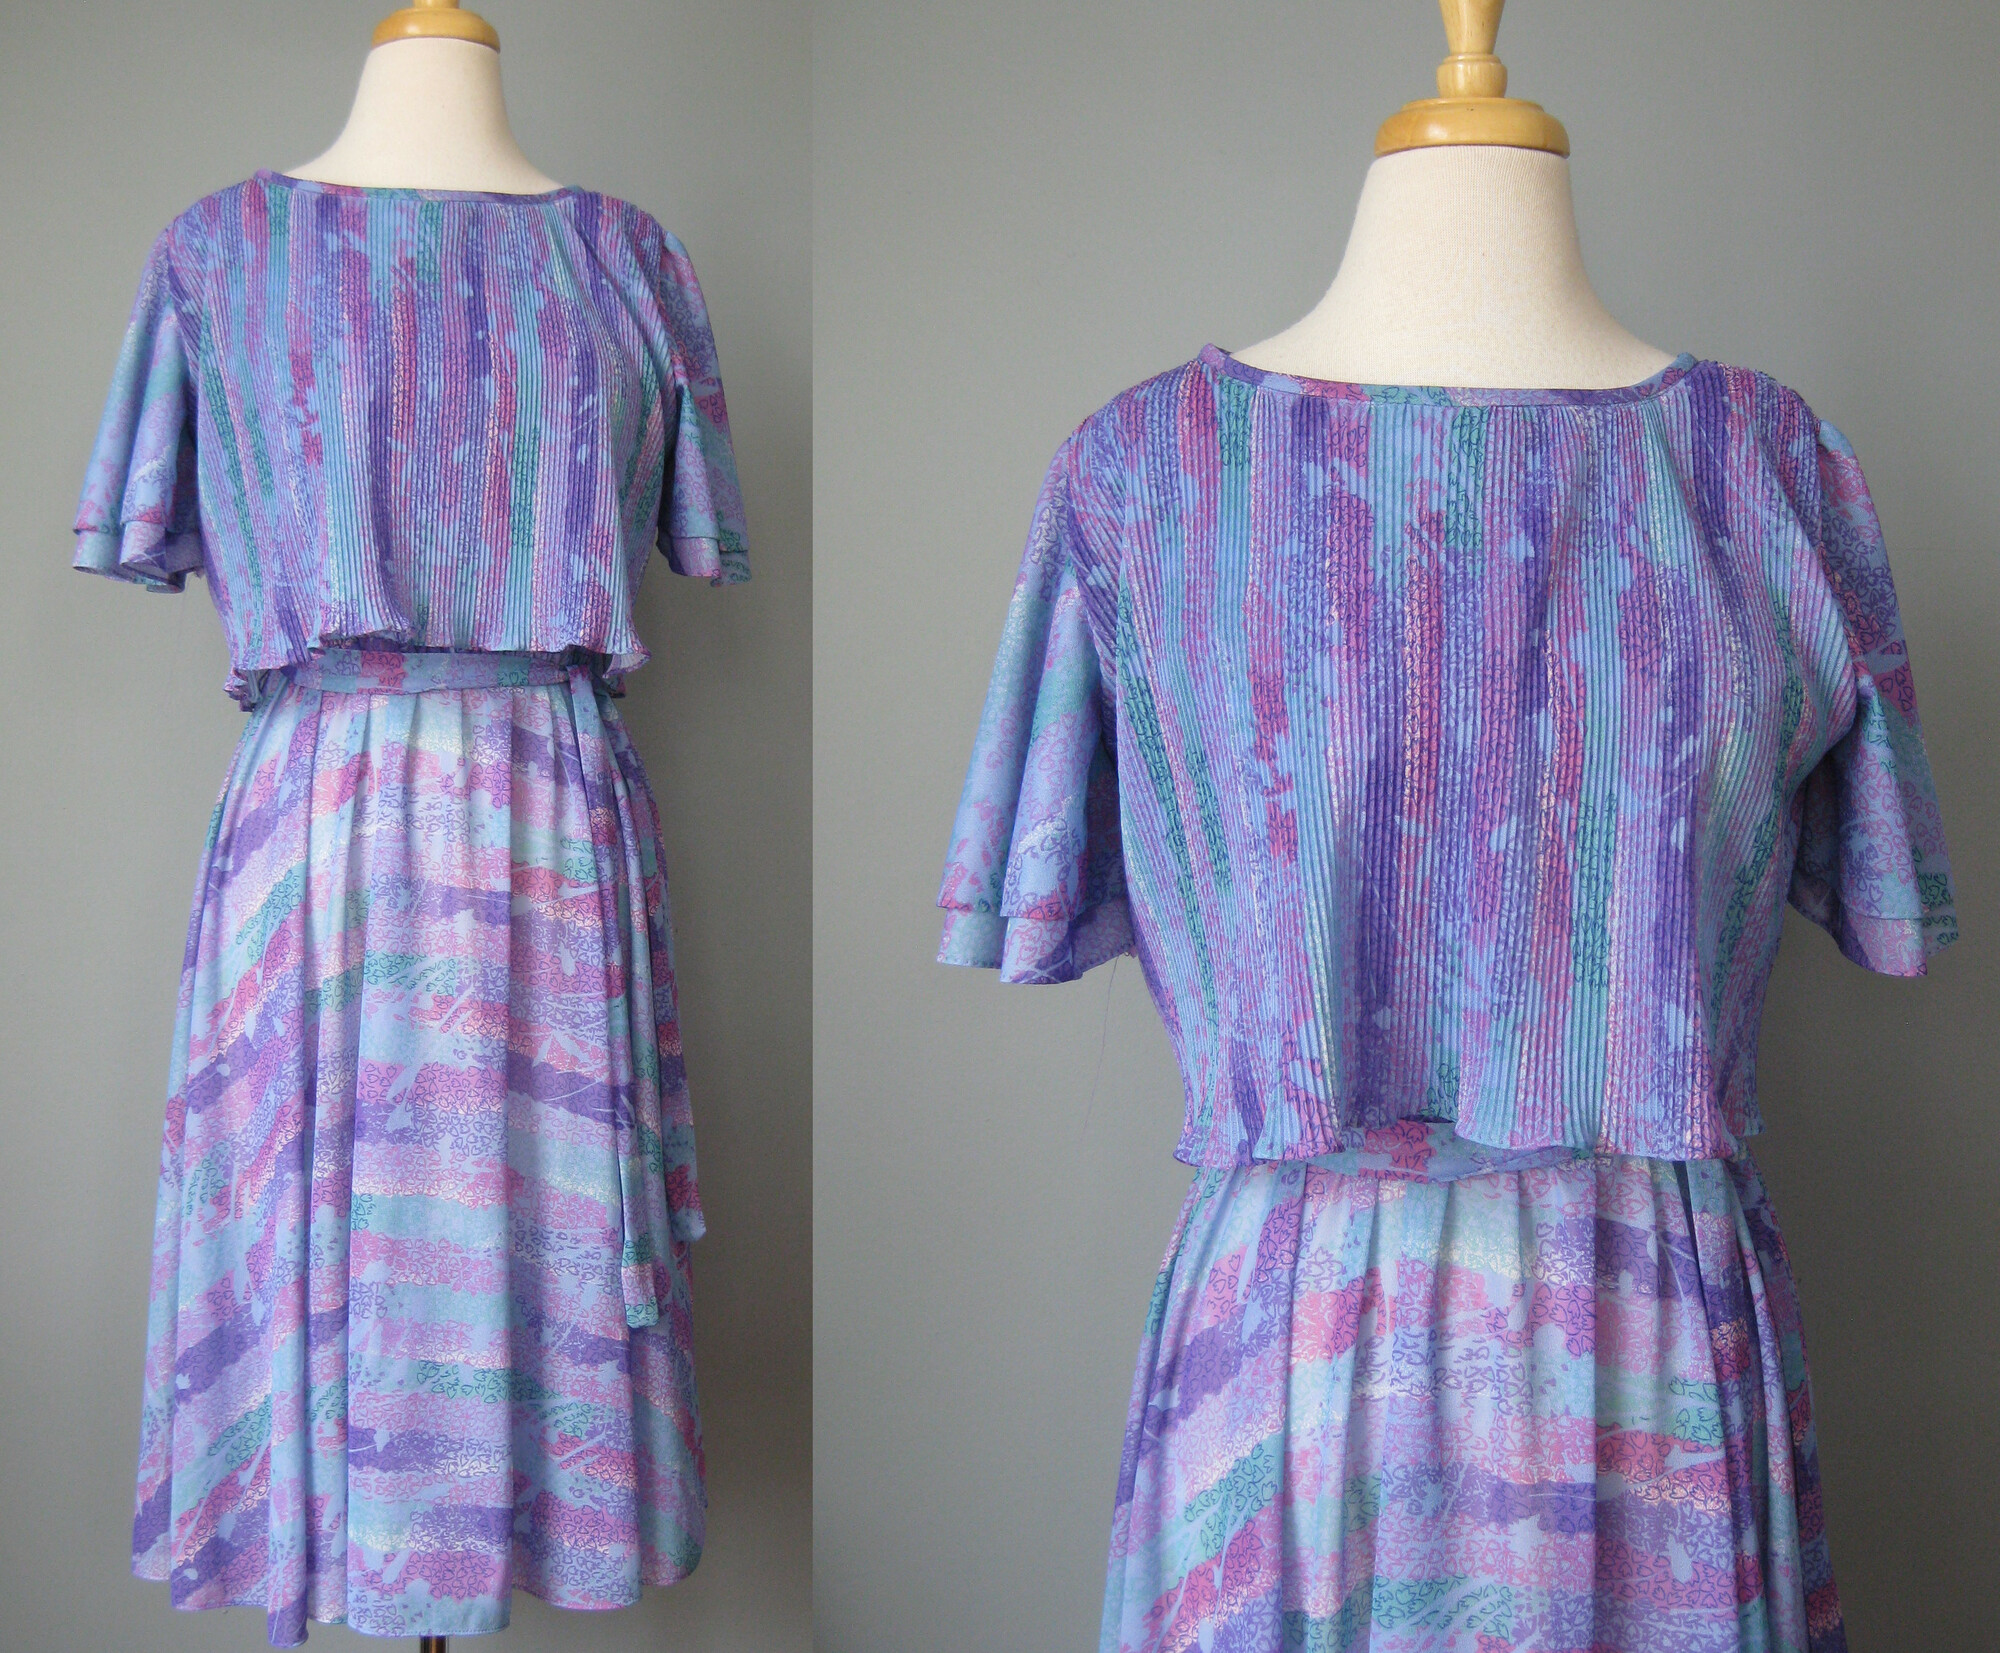 Vtg 70s Floral, Lilac, Size: Small
Sweet below the knee dress in a very lightweight polyester.
Abstract print in purples and blues.
The dress has an elastic waist and a micro pleated capelet.
Flutter sleeves and matching sash
The skirt is sheer so you will need a half slip with it.
No labels but I believe this is from the late 70s, on the cusp of disco fever and it reminds me of the dresses worn by the heroine of Saturday Night Fever.

Here are the flat measurements, please double where appropriate:
Shoulder to shoulder: 15.5
Armpit to Armpit: 20
Waist:  13 stretches comfortably to 16
Hip: free
length: 39

Thanks for looking!
#41301